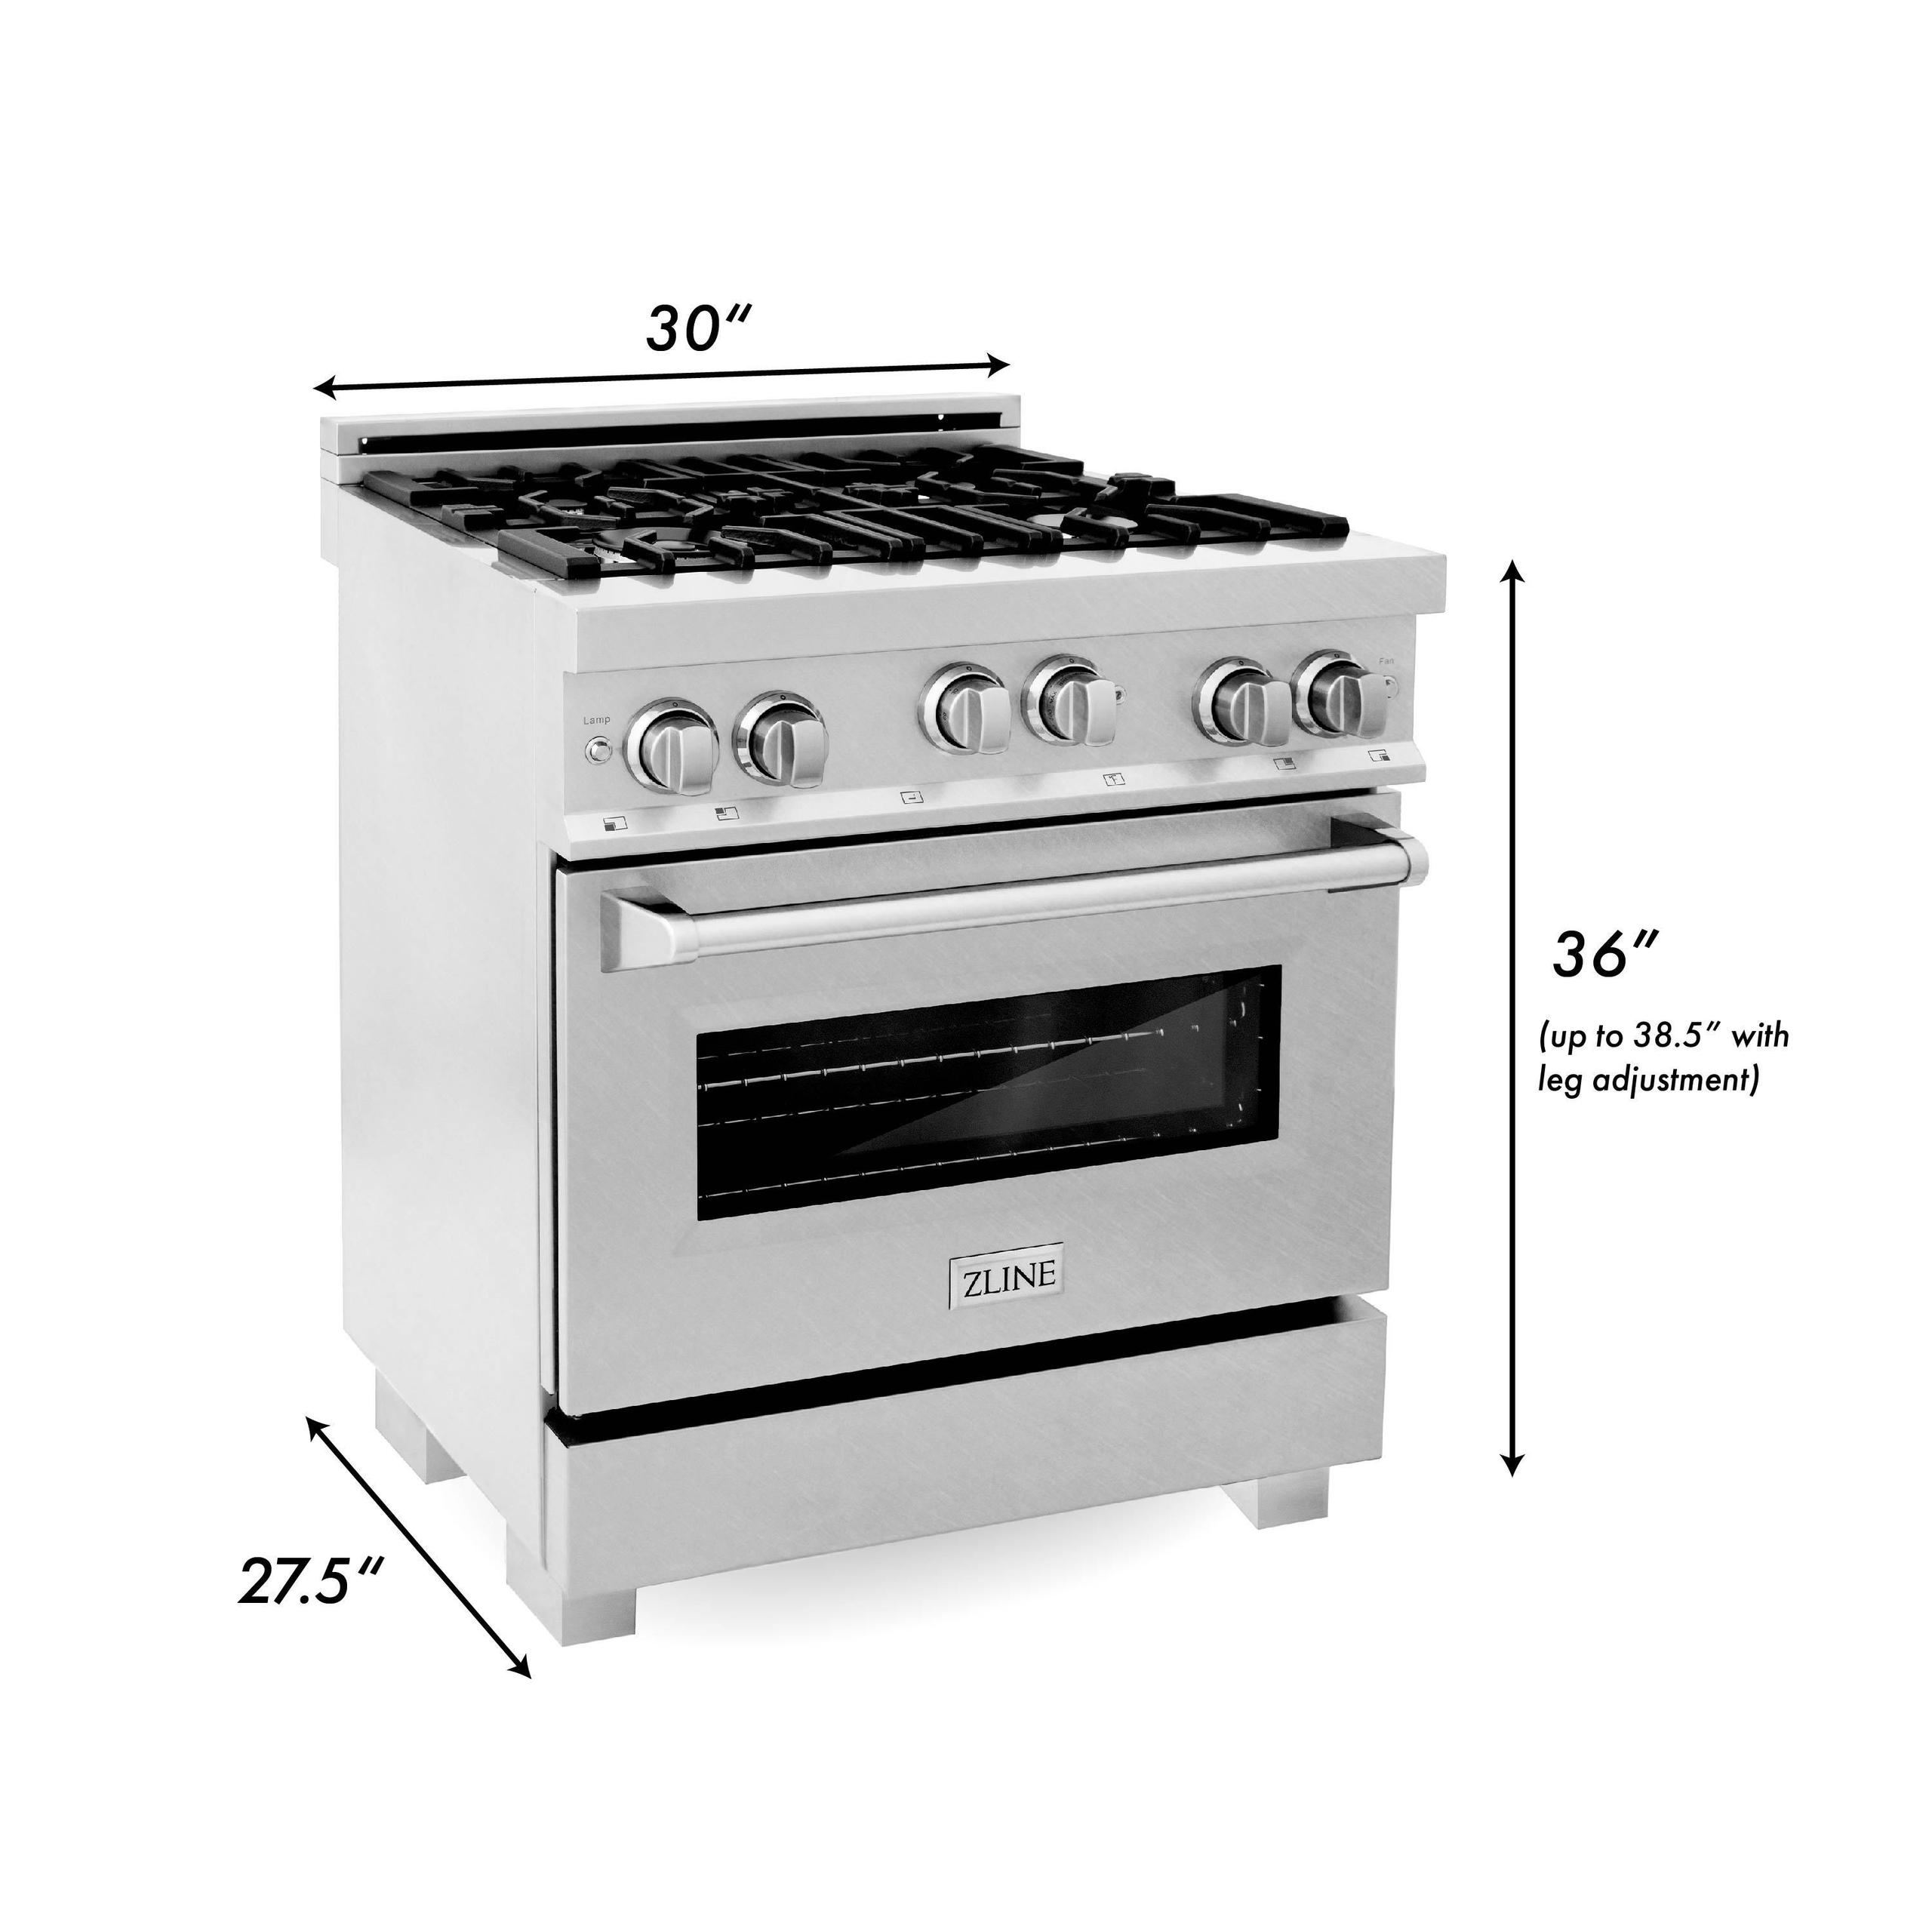 ZLINE KITCHEN AND BATH RGSBG30 ZLINE 30" 4.0 cu. ft. Range with Gas Stove and Gas Oven in DuraSnow R Stainless Steel with Color Door Options Color: Blue Gloss